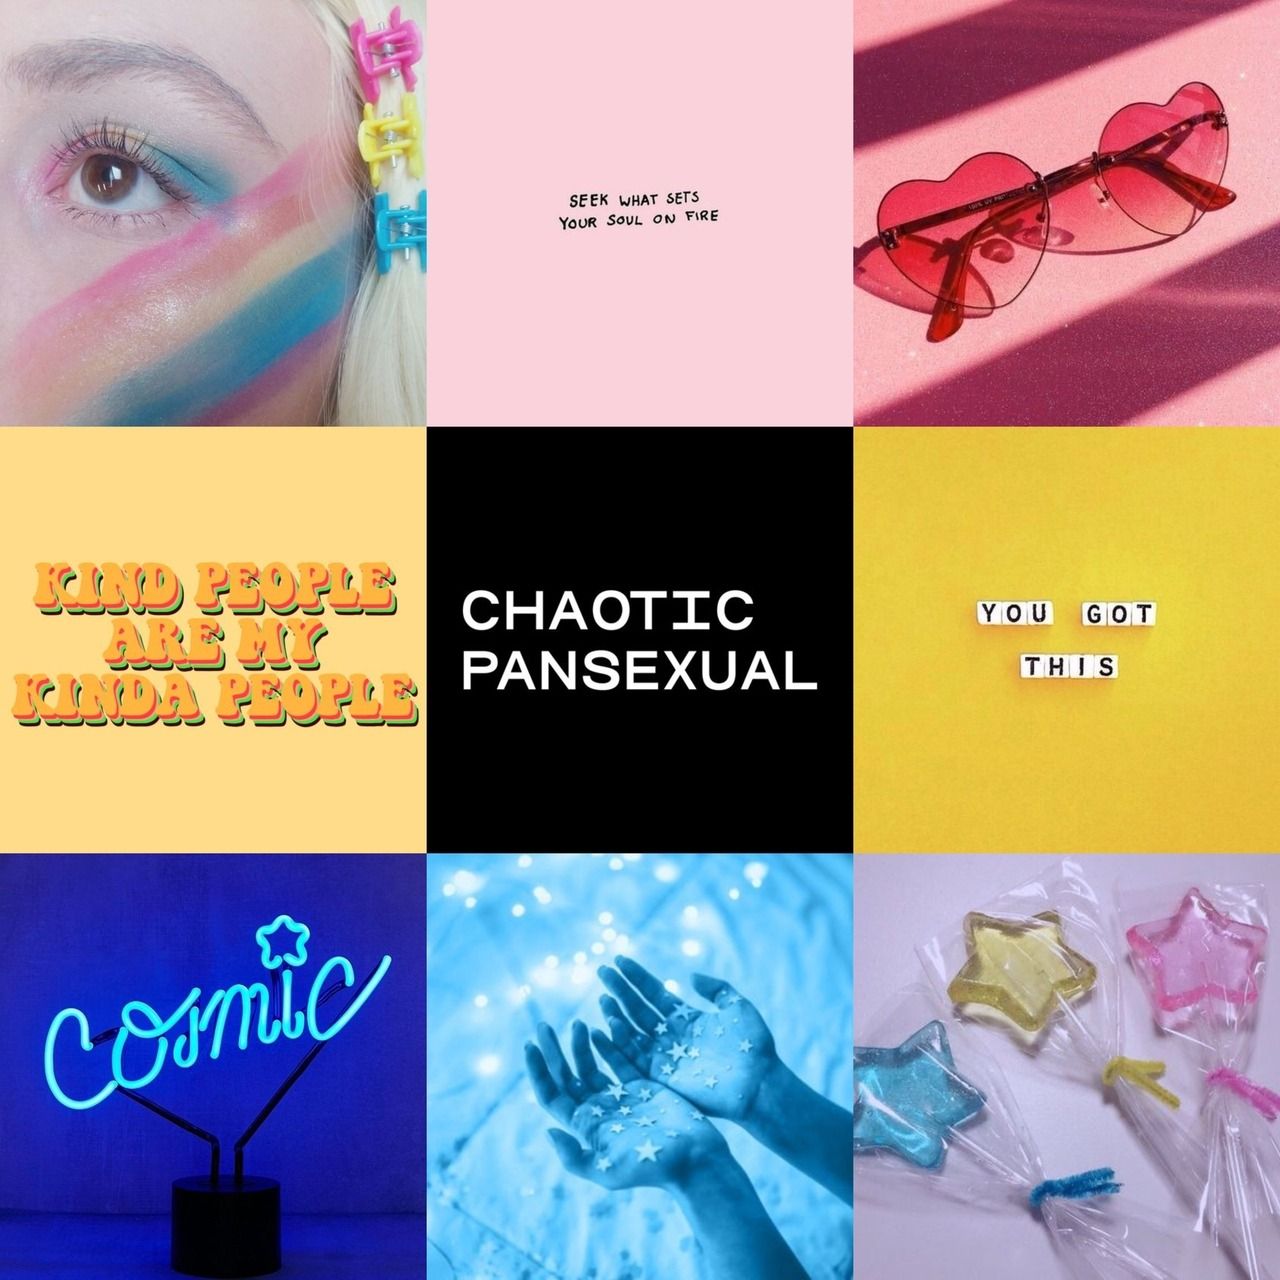 Pansexual Wallpaper Aesthetic / Pin on ♡ wallpapers - Adpan 